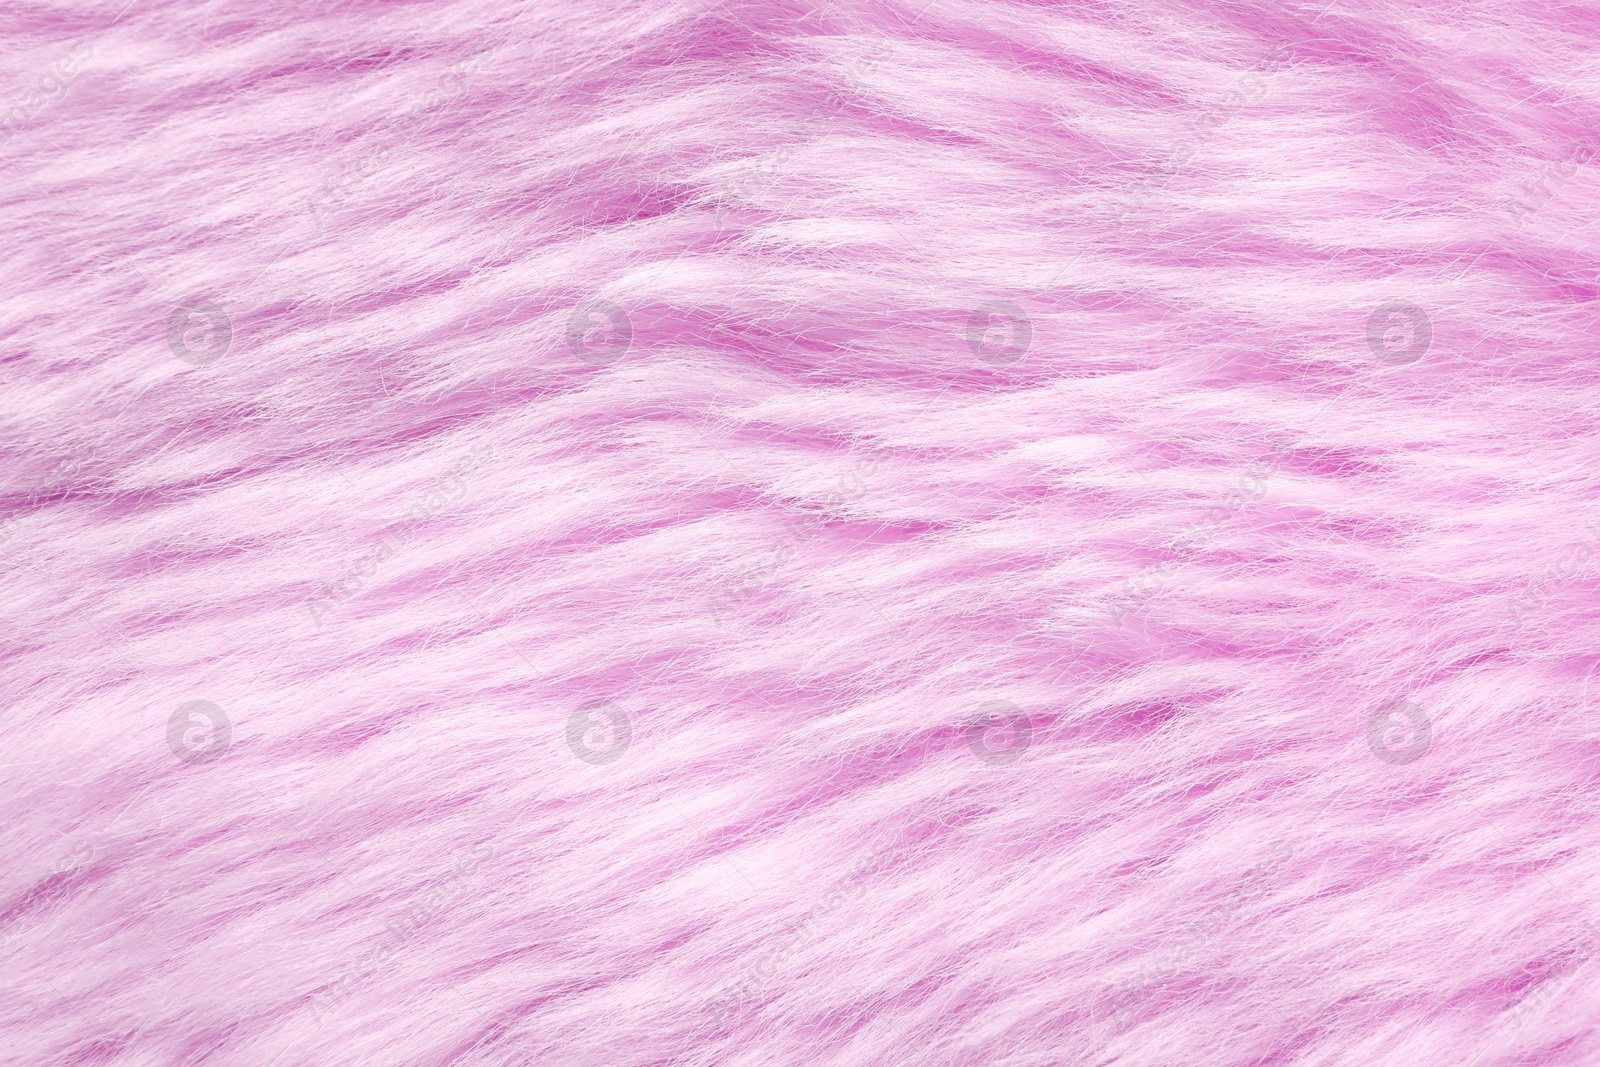 Image of Texture of pink faux fur as background, closeup